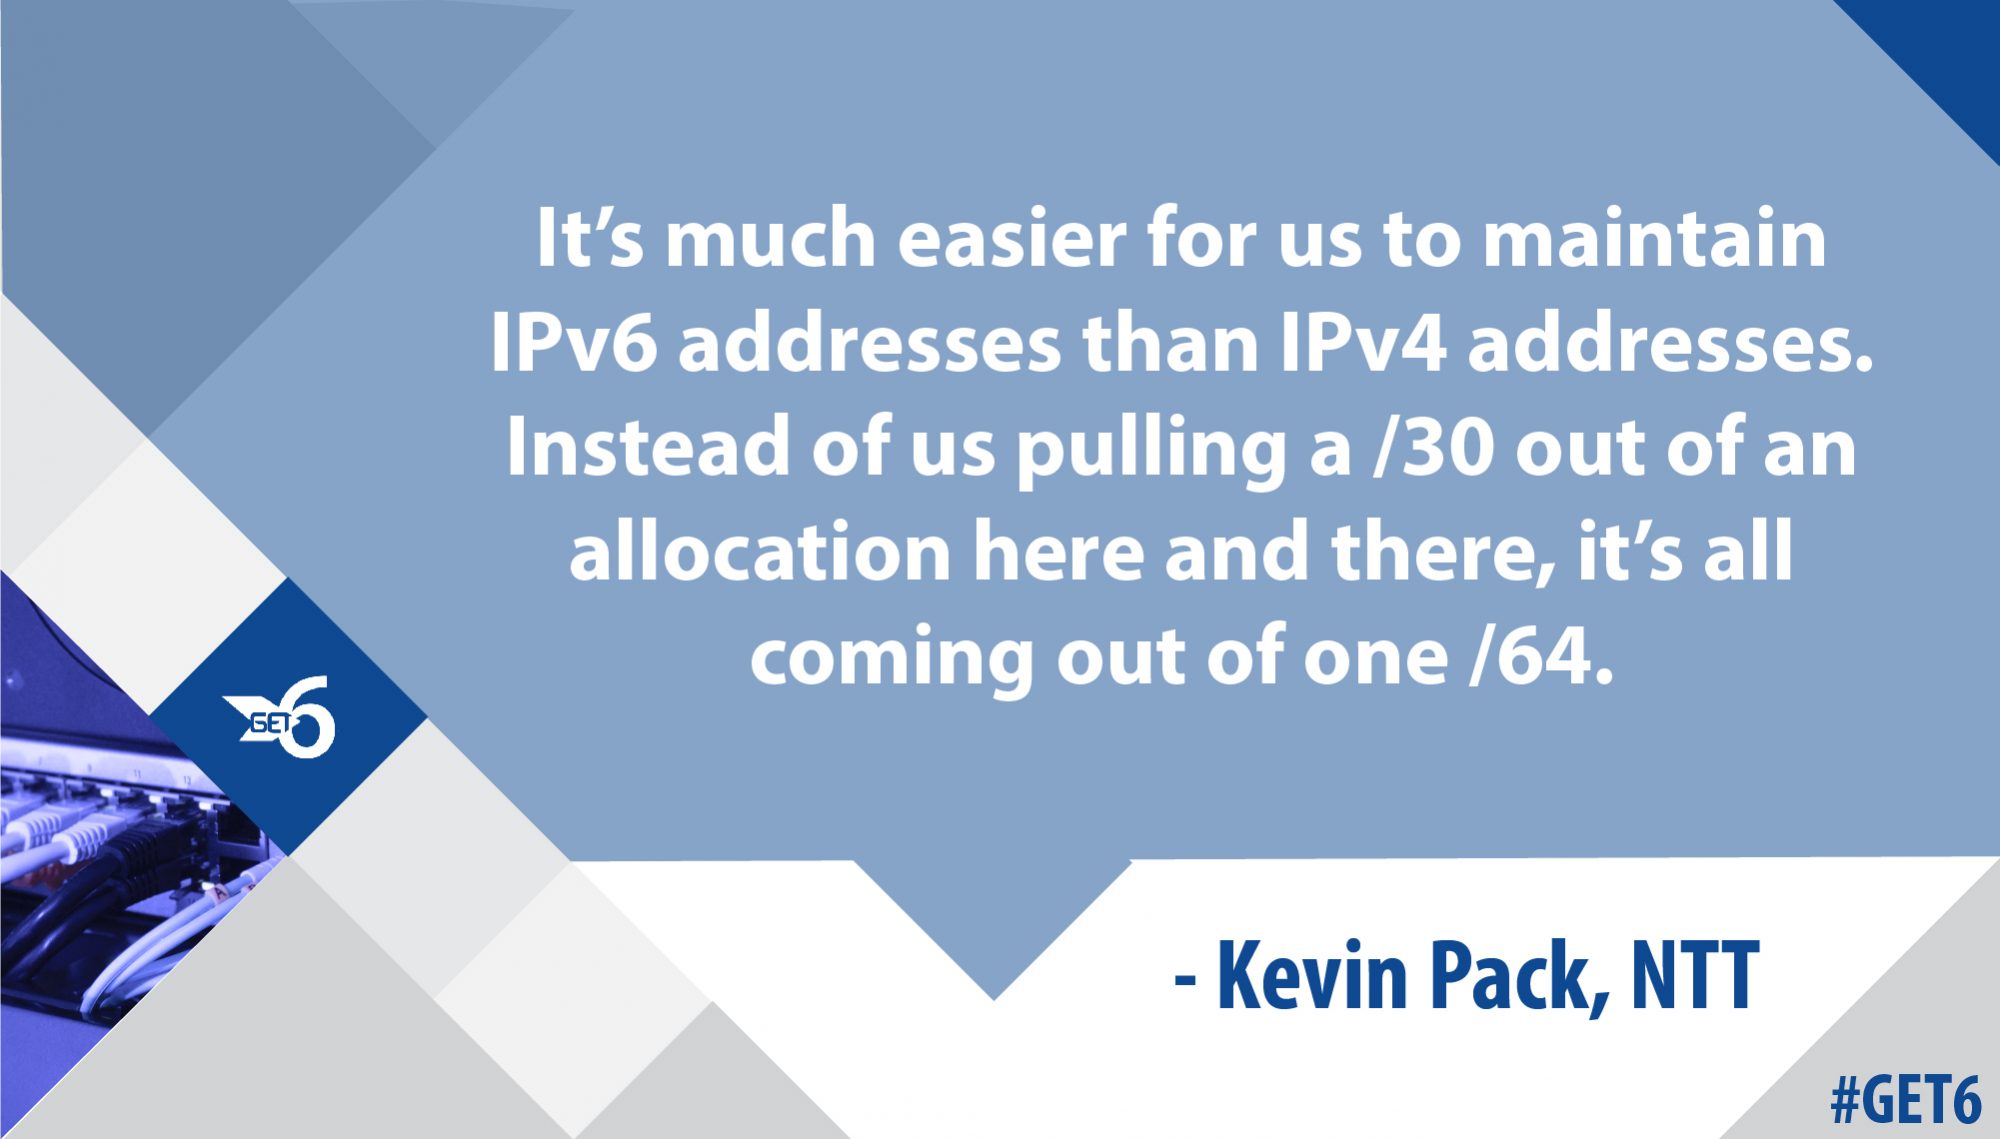 &ldquo;It’s much easier for us to maintain IPv6 addresses than IPv4 addresses. Instead of us pulling a /30 out of an allocation here and there, it’s all coming out of one /64.&rdquo;